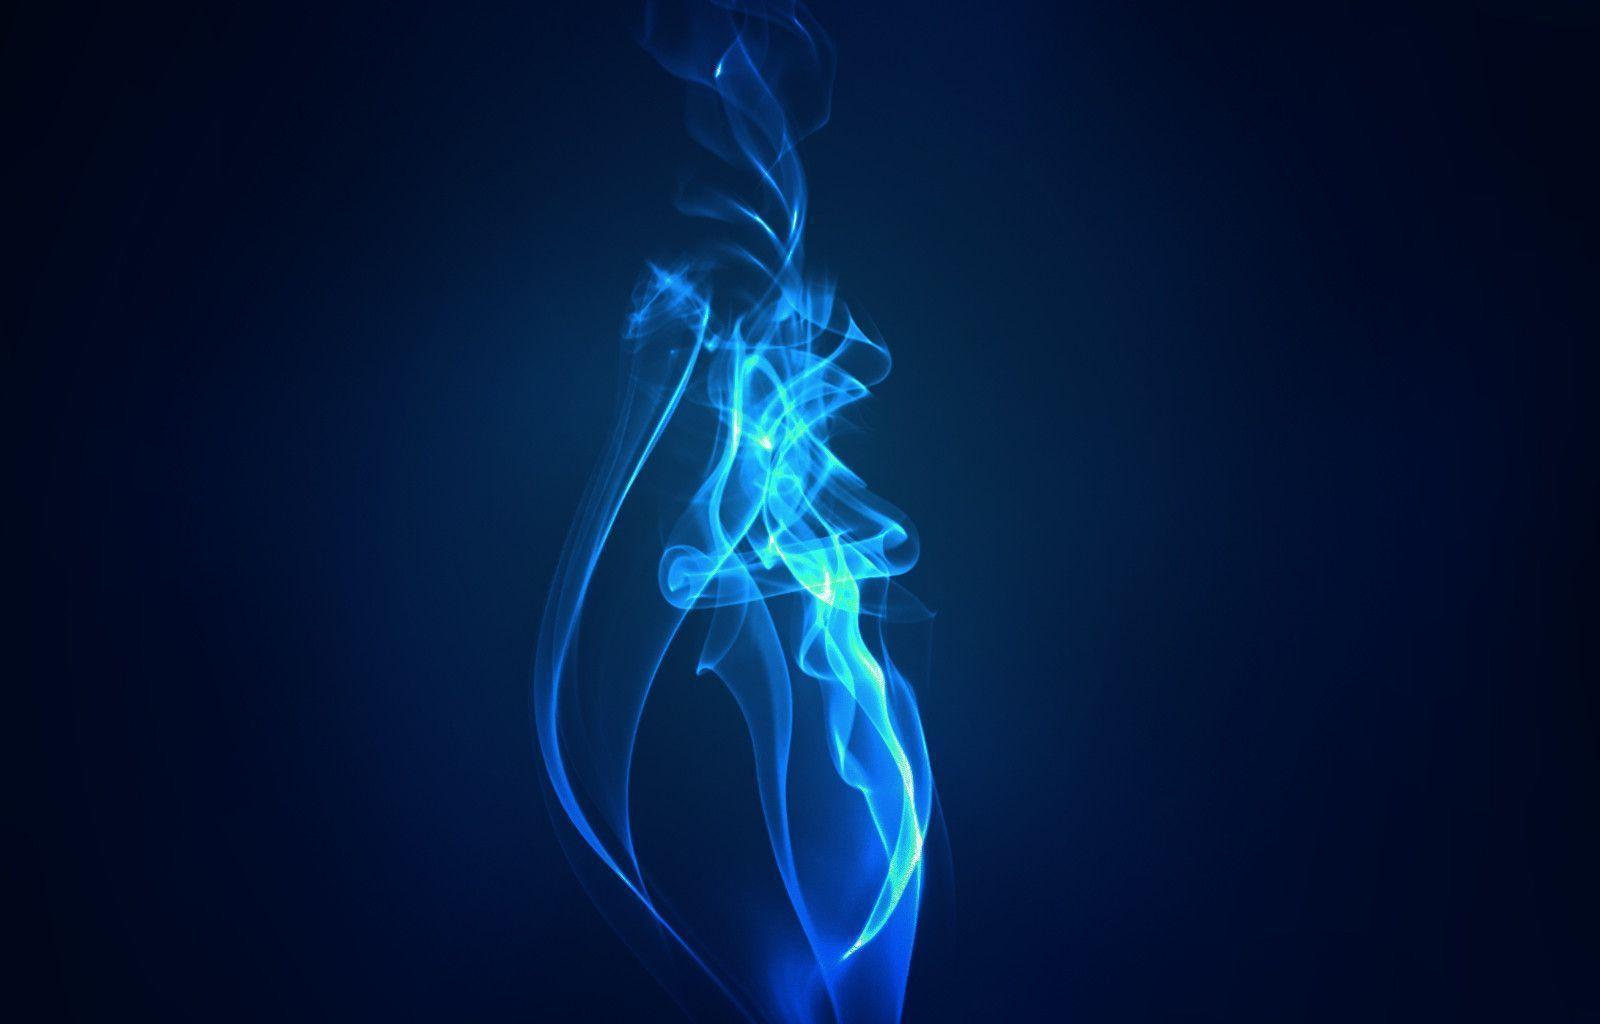 Blue Flame Wallpapers